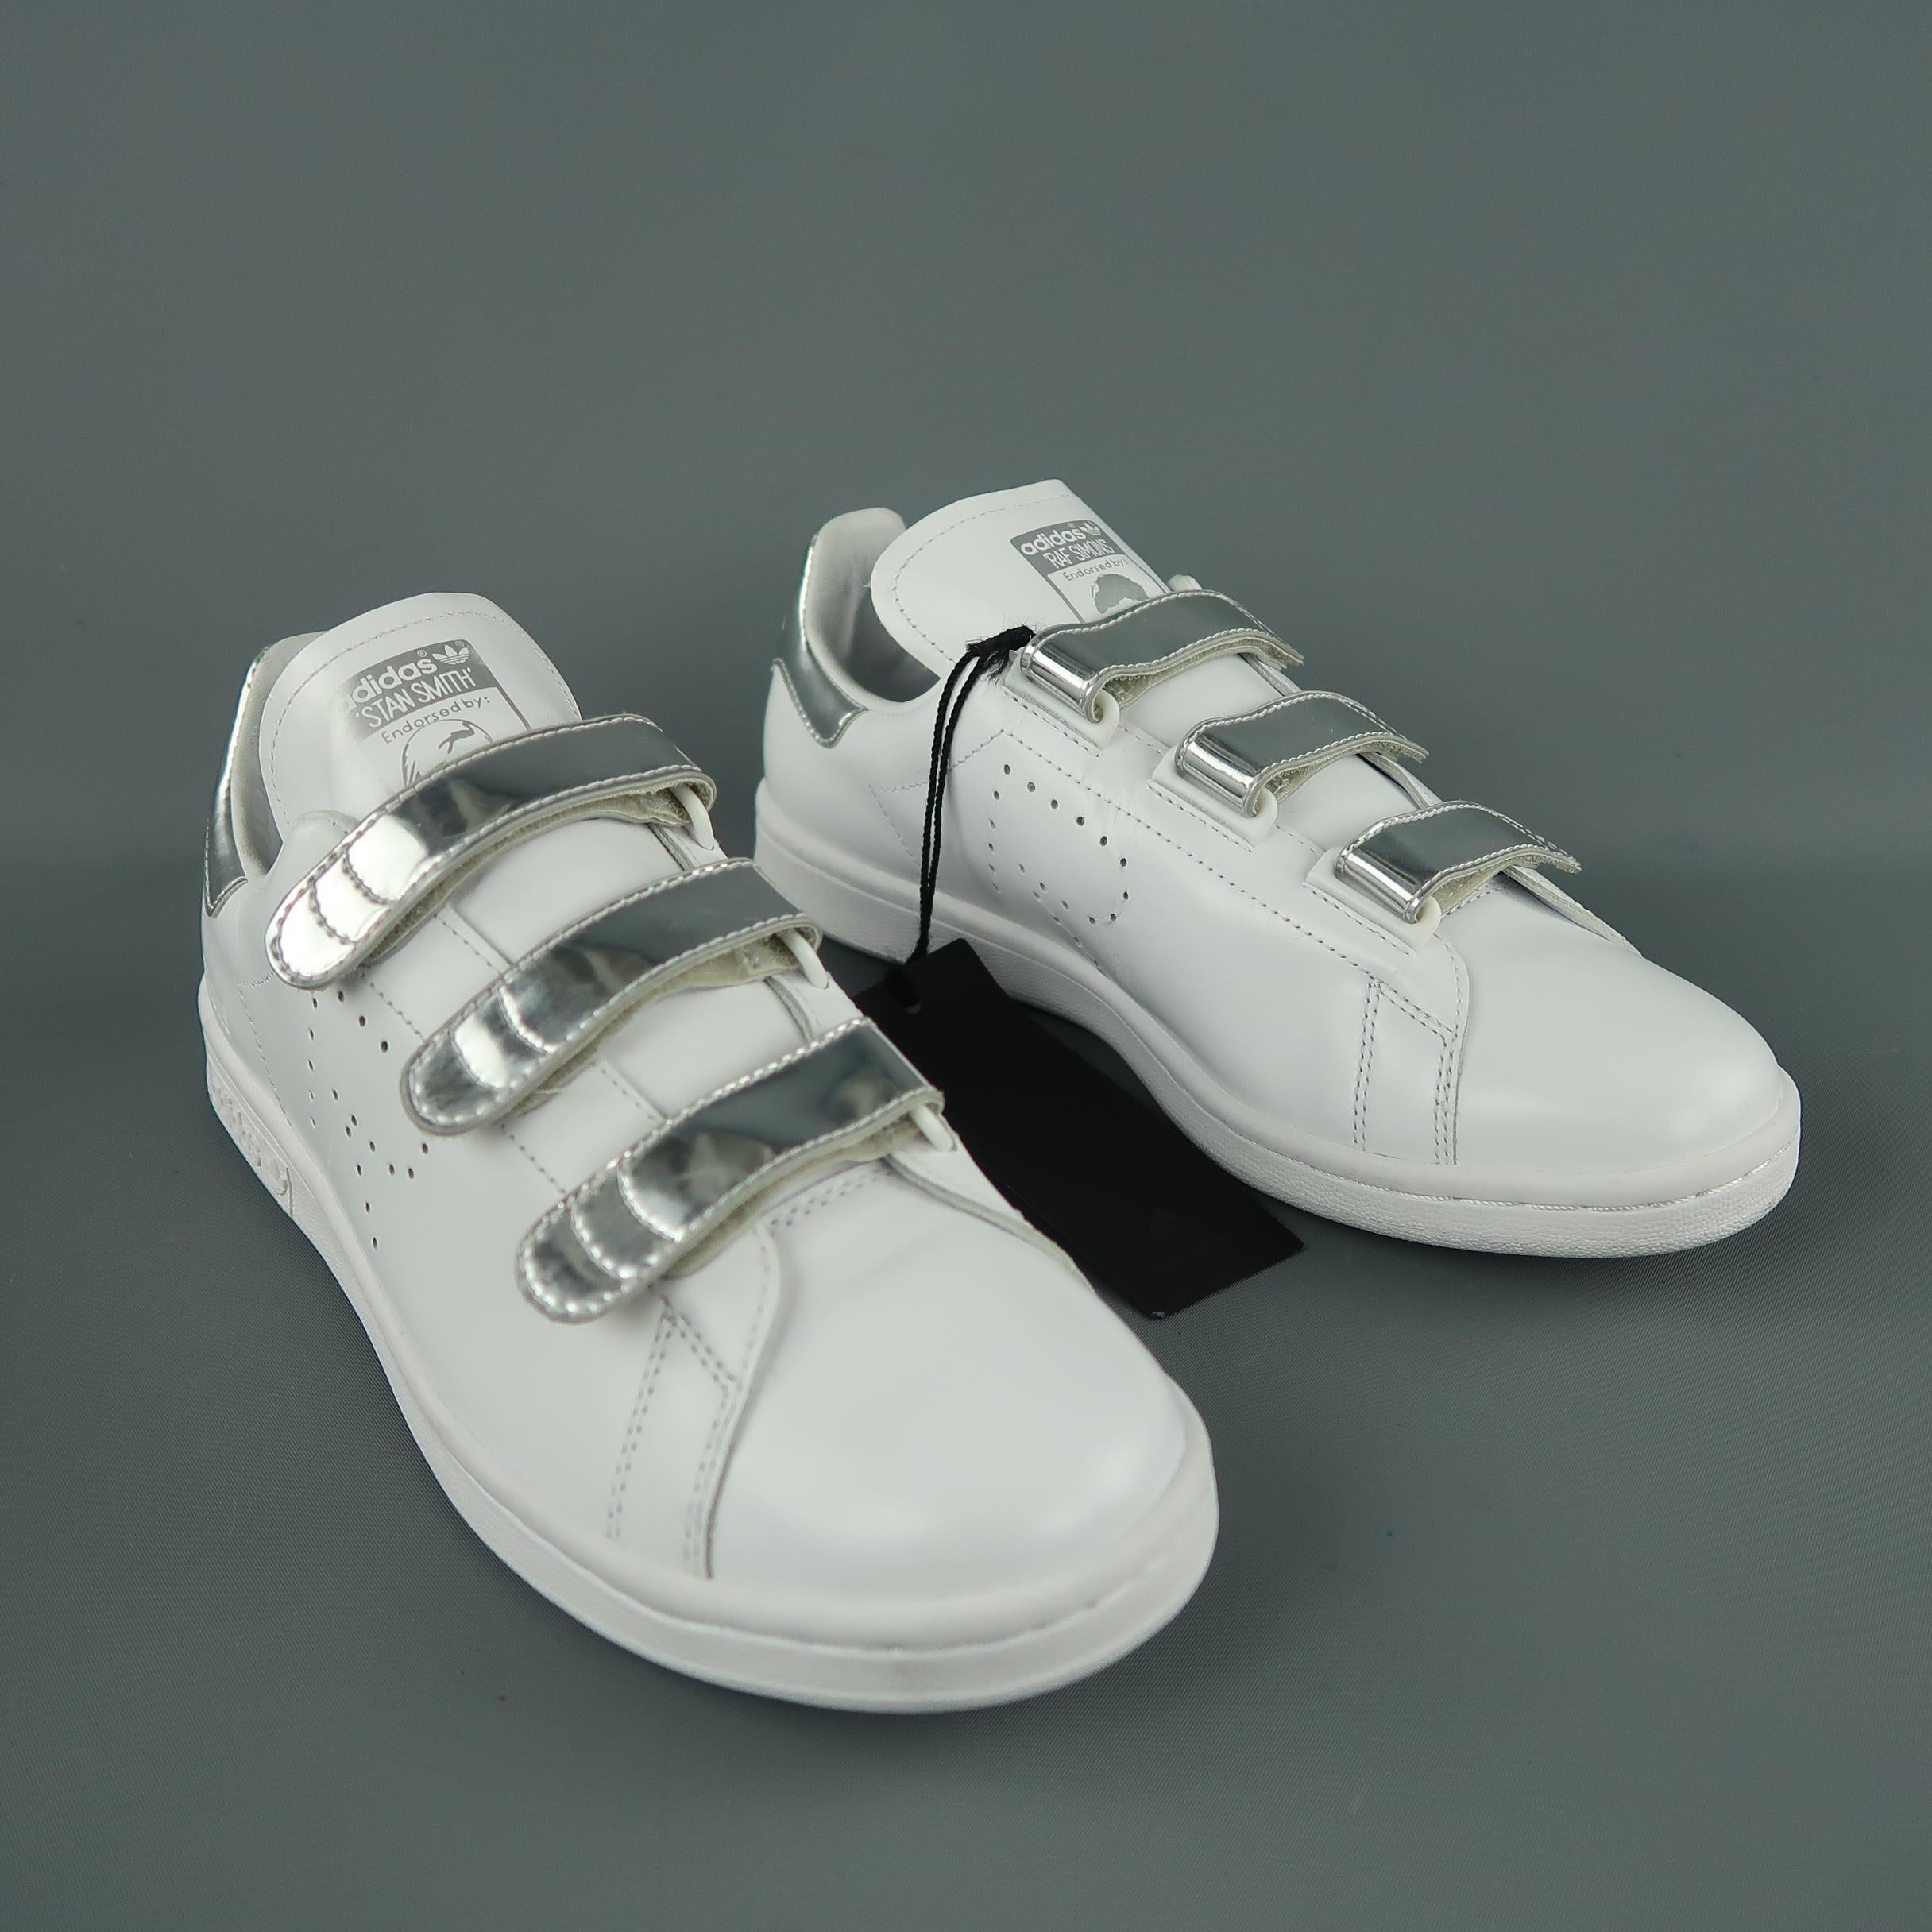 Adidas by RAF SIMONS  sneakers come in white solid leader, with silver strap closure. With Box.
 
New with Tags.
Marked: 8.5 US
 
Measurements:
Outsole: 11.5 x 2.5 in.